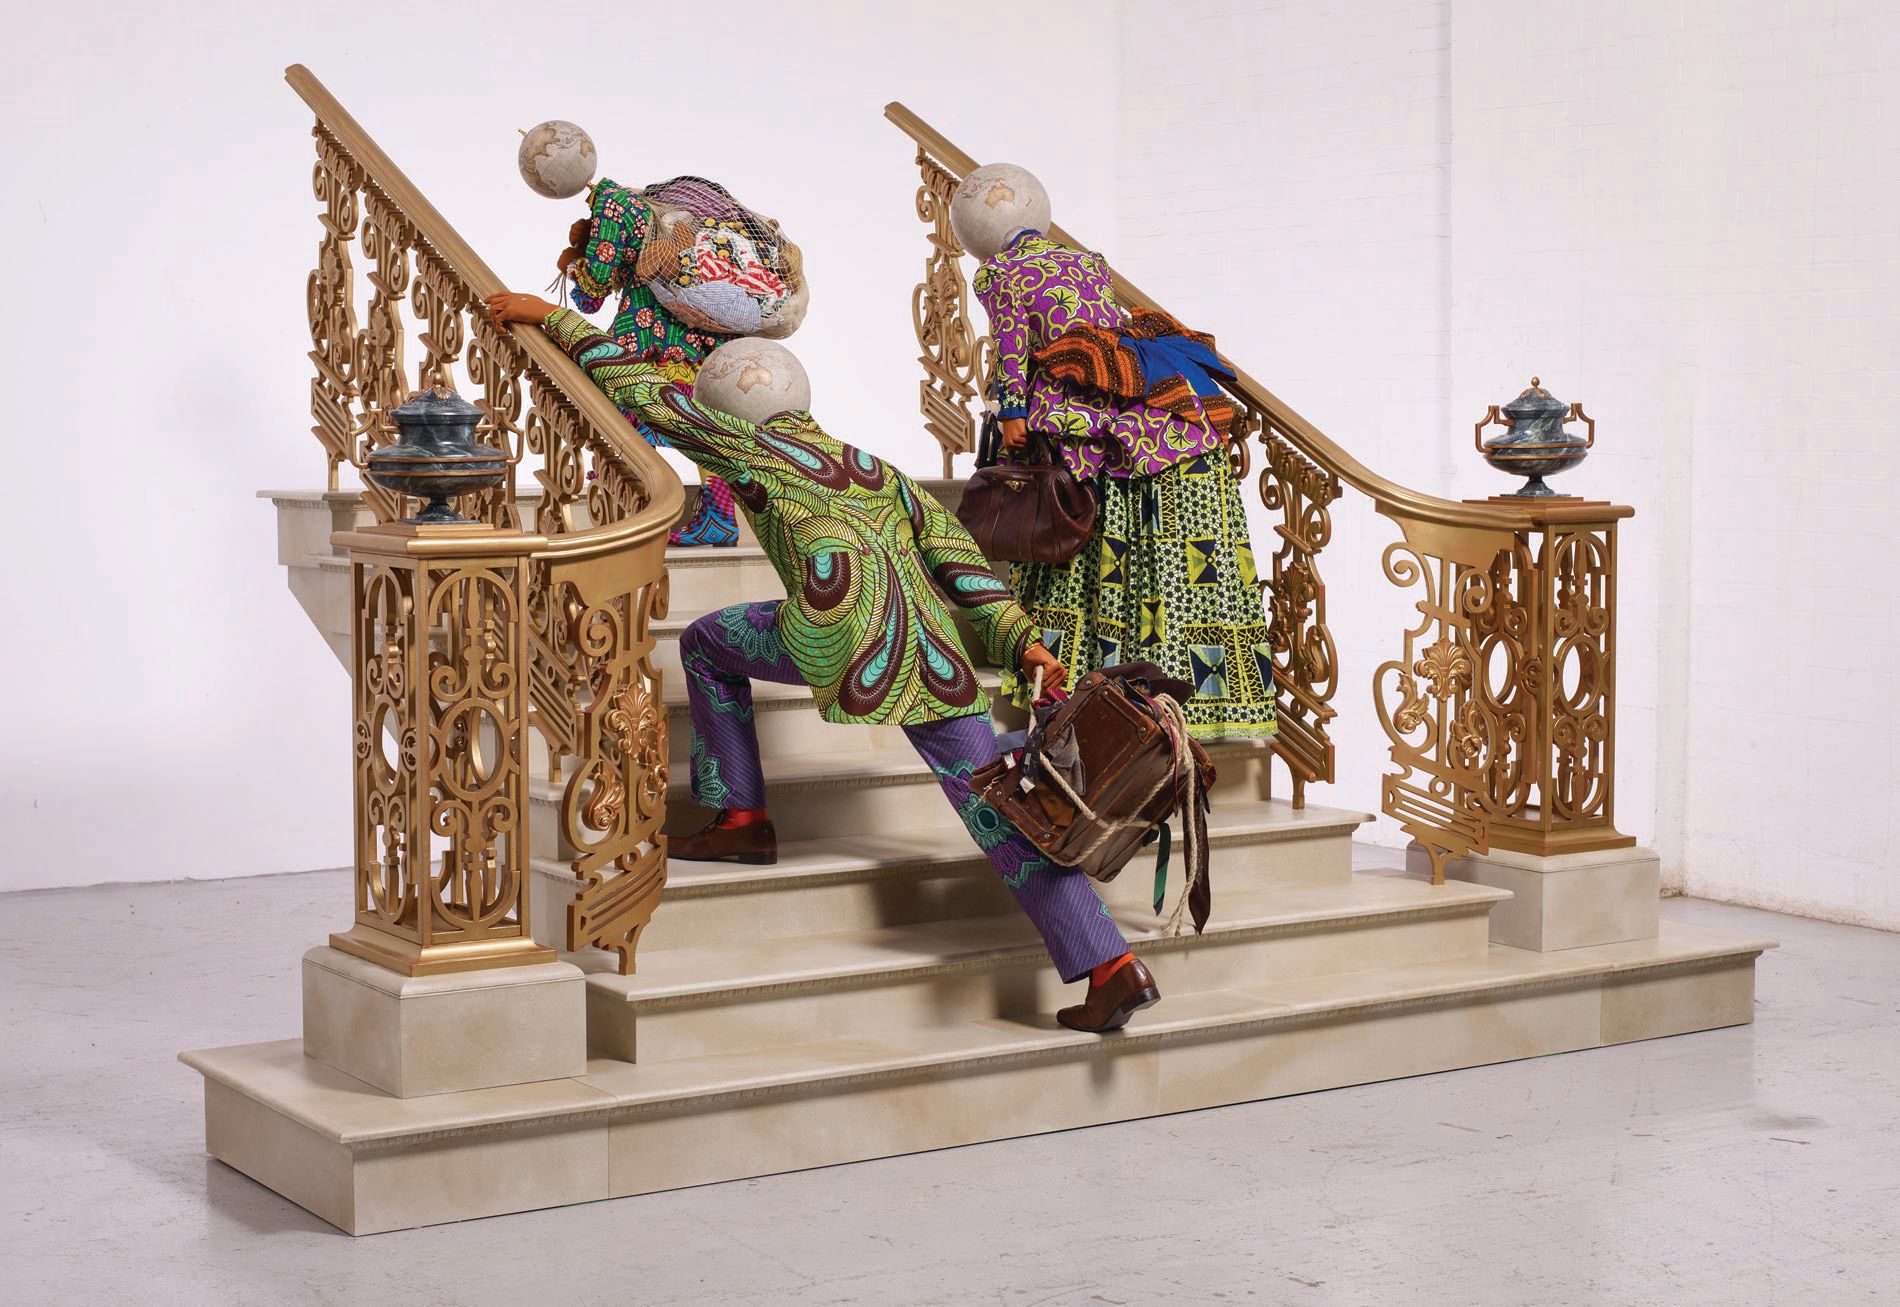 Yinka Shonibare, CBE, “Moving Up” (2021, Dutch wax printed cotton textile, bespoke globes, brass, leather, hemp rope, paper, various toys, cotton, silk, steel, aluminum and painted wood), 90 1/2 inches by 141 3/4 inches by 98 3/8 inches PHOTO: BY STEPHEN WHITE & CO./COURTESY OF THE ARTIST AND JAMES COHAN, NEW YORK